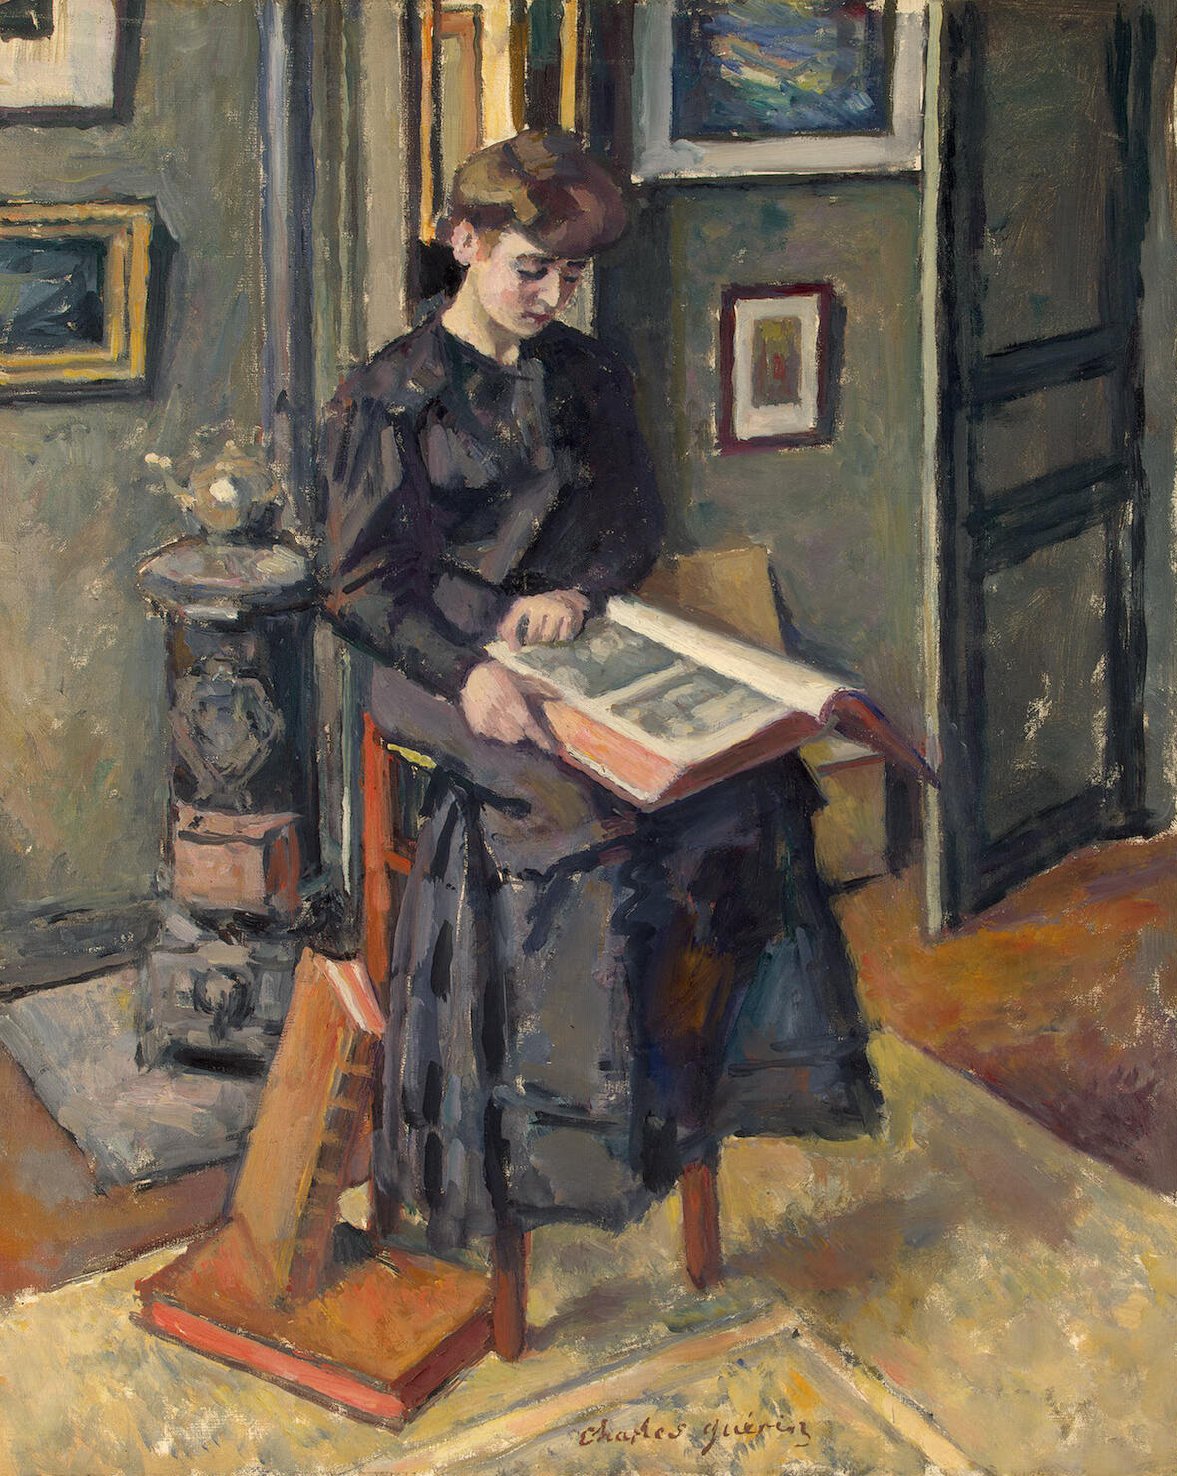 images/Girl_Reading_a_Book.jpg